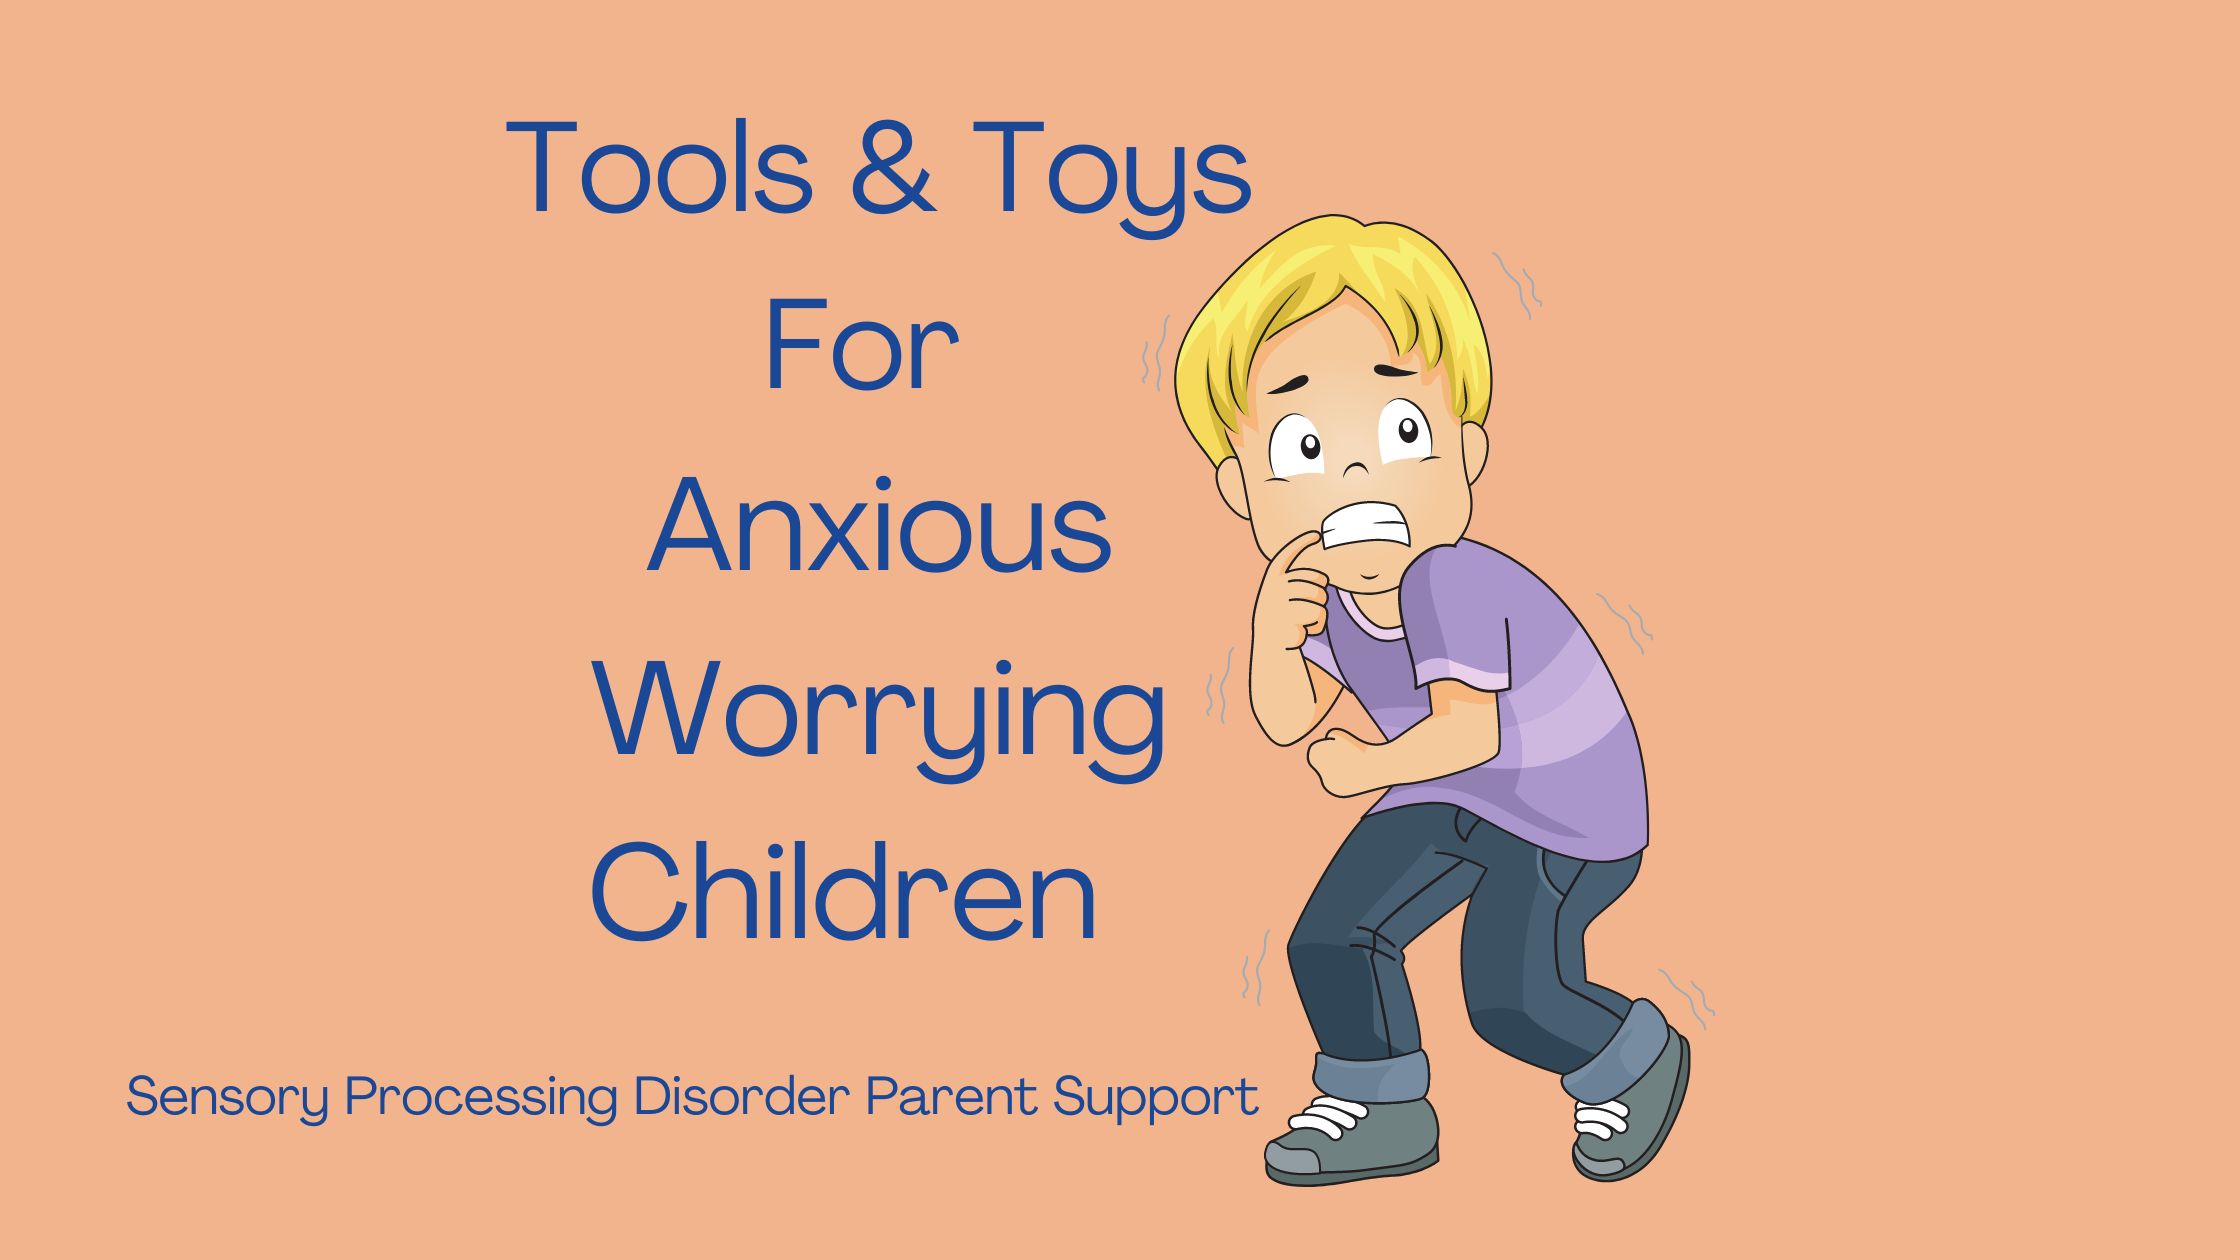 nervous child worried with anxiety Tools & Toys For  Anxious Worrying Children